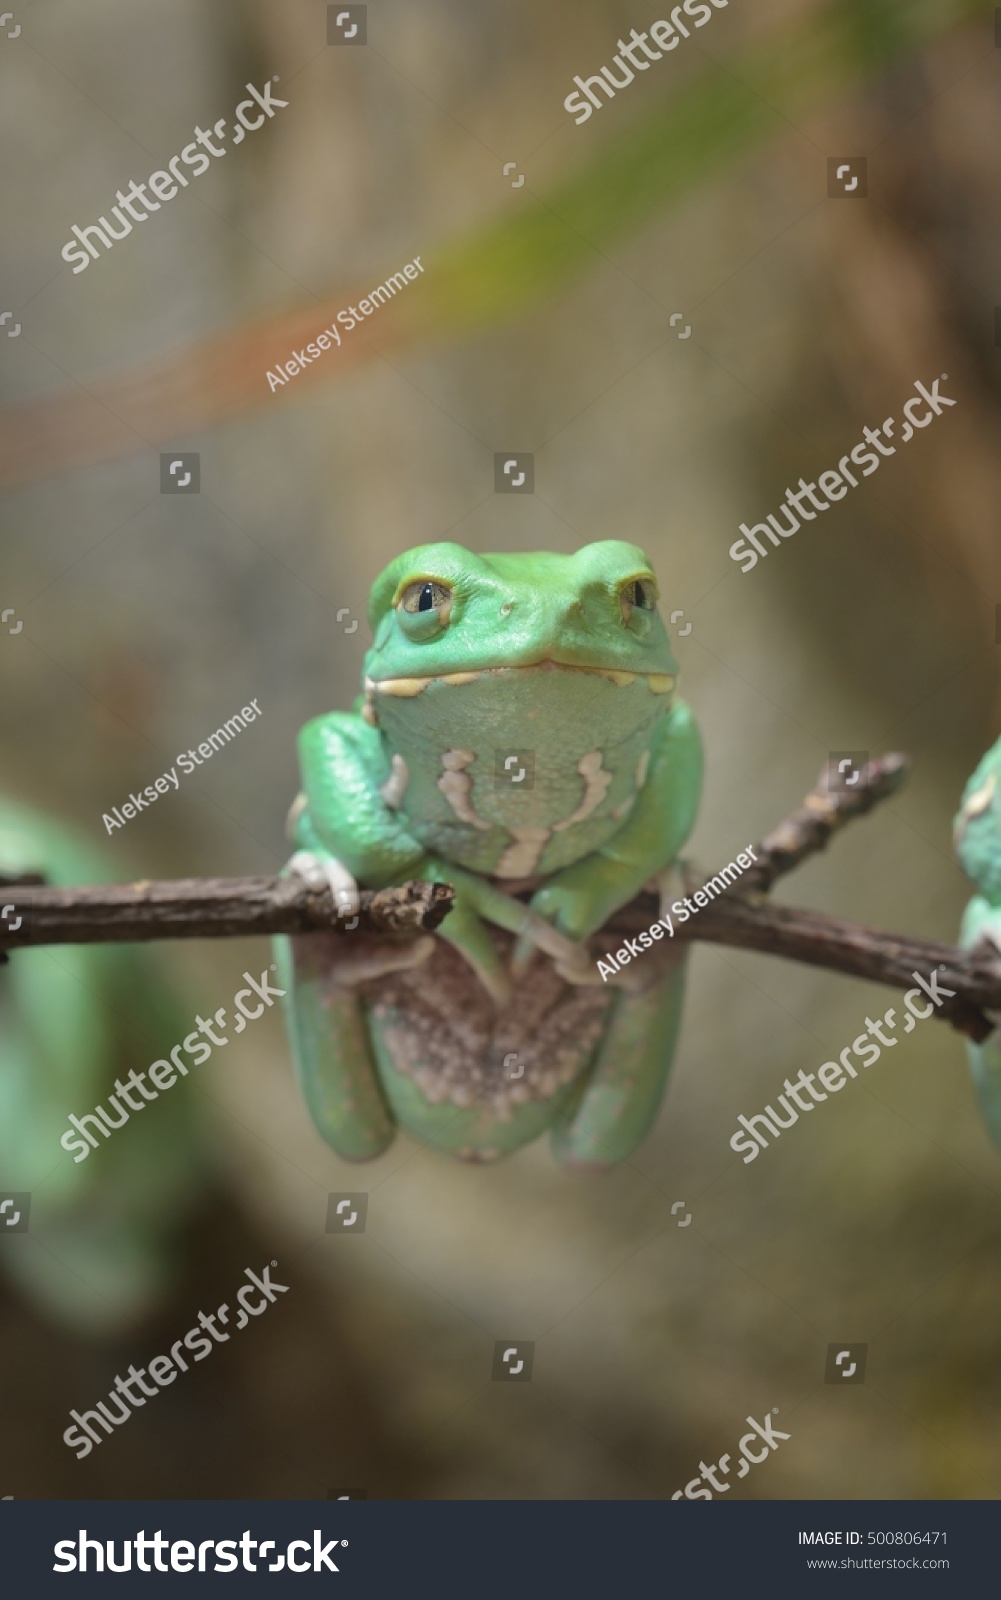 Waxy monkey leaf frog (Phyllomedusa sauvagii) in natural rainforest environment on a branch. Colorful bright green tropical frog. #500806471